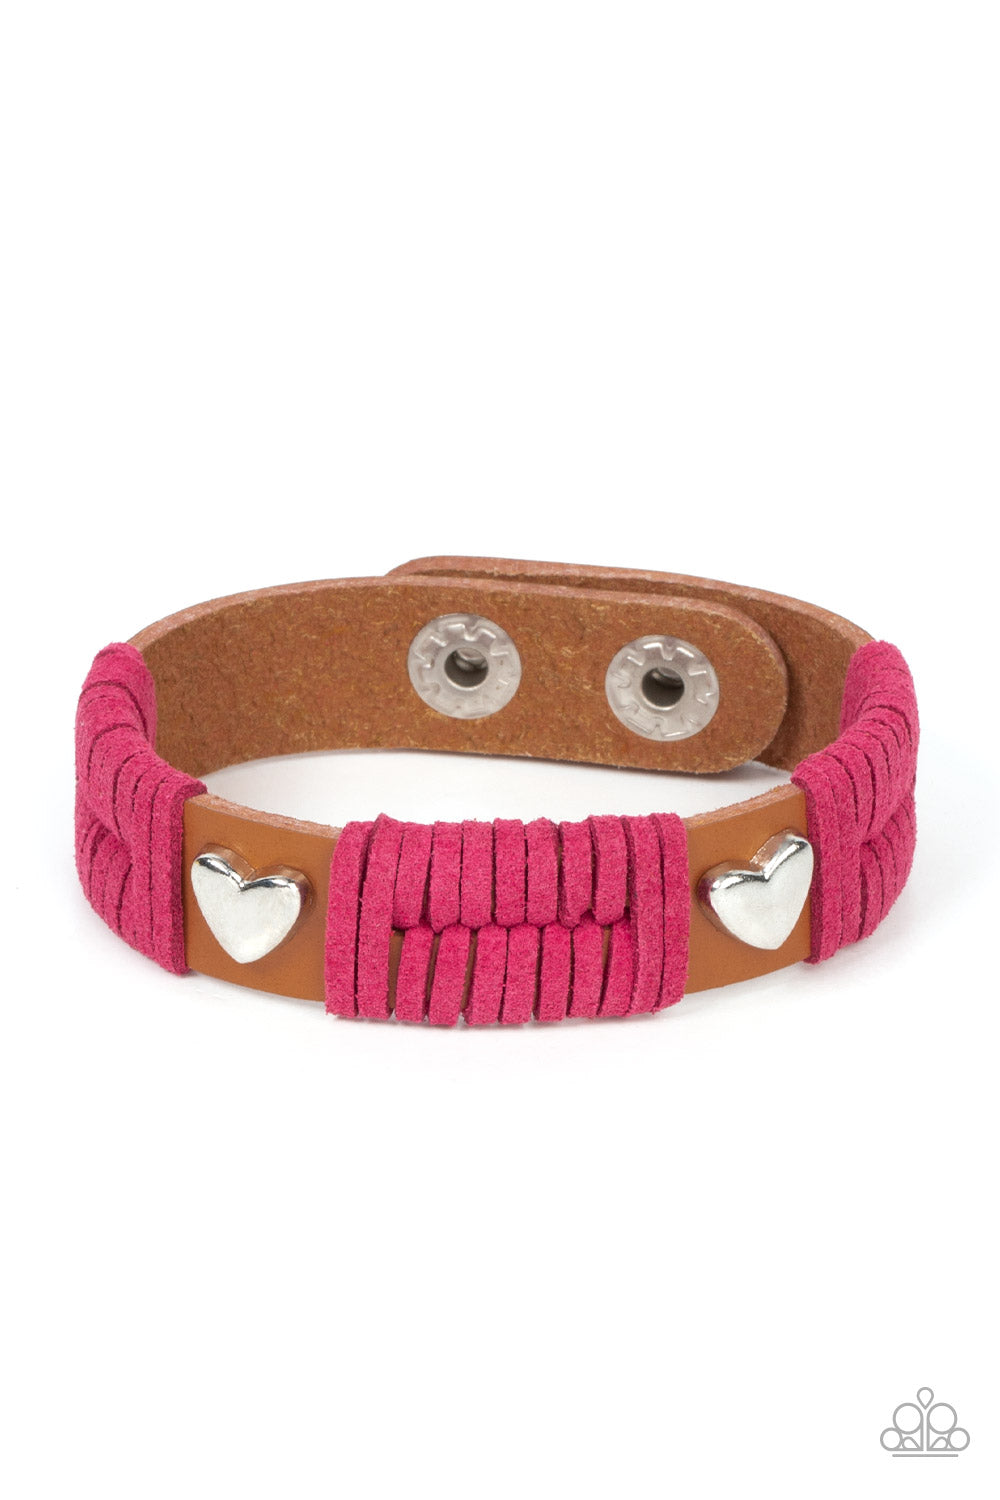 five-dollar-jewelry-lusting-for-wanderlust-pink-bracelet-paparazzi-accessories